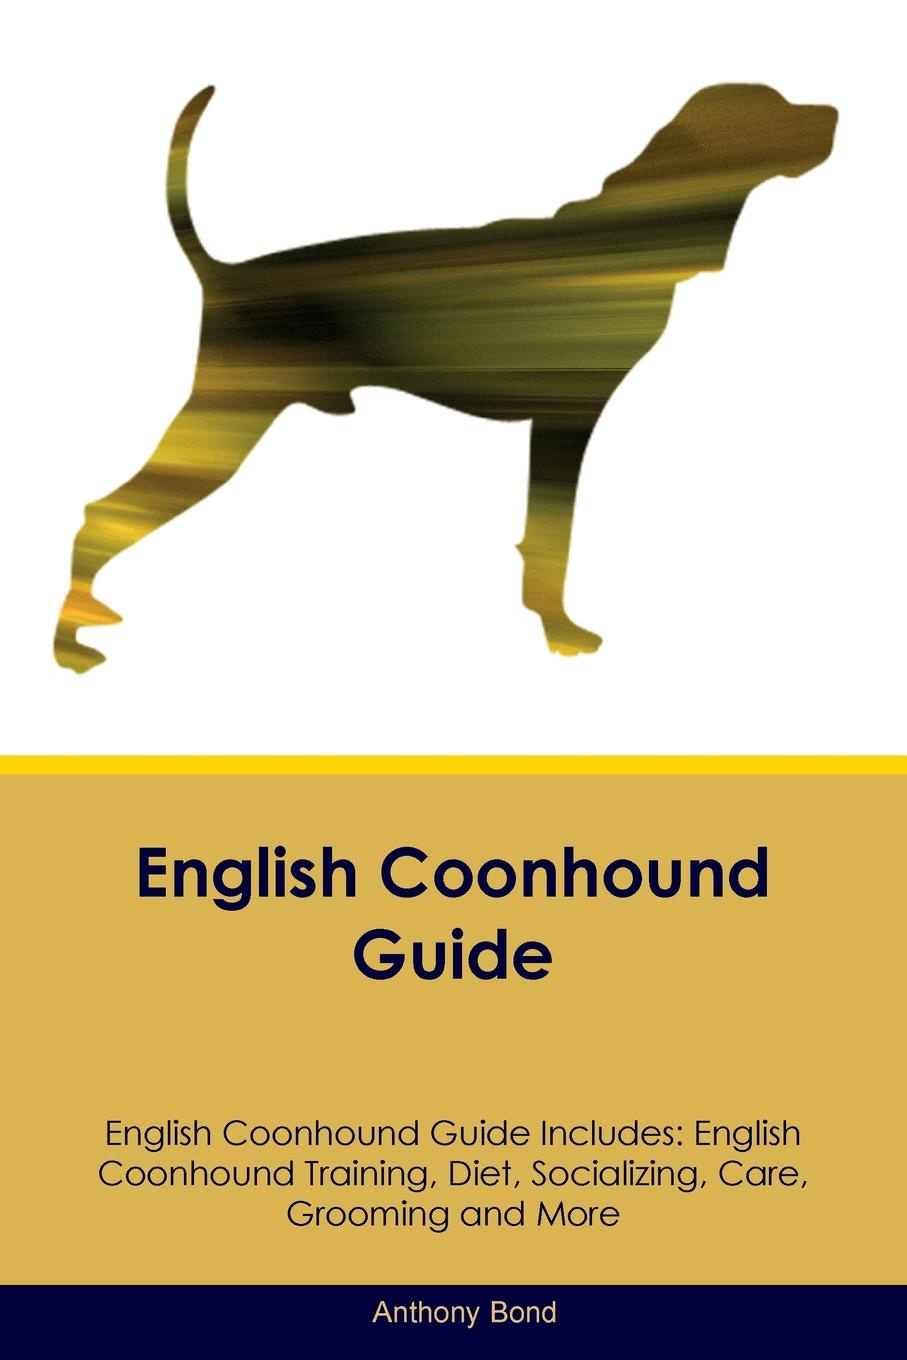 English Coonhound Guide English Coonhound Guide Includes. English Coonhound Training, Diet, Socializing, Care, Grooming, Breeding and More